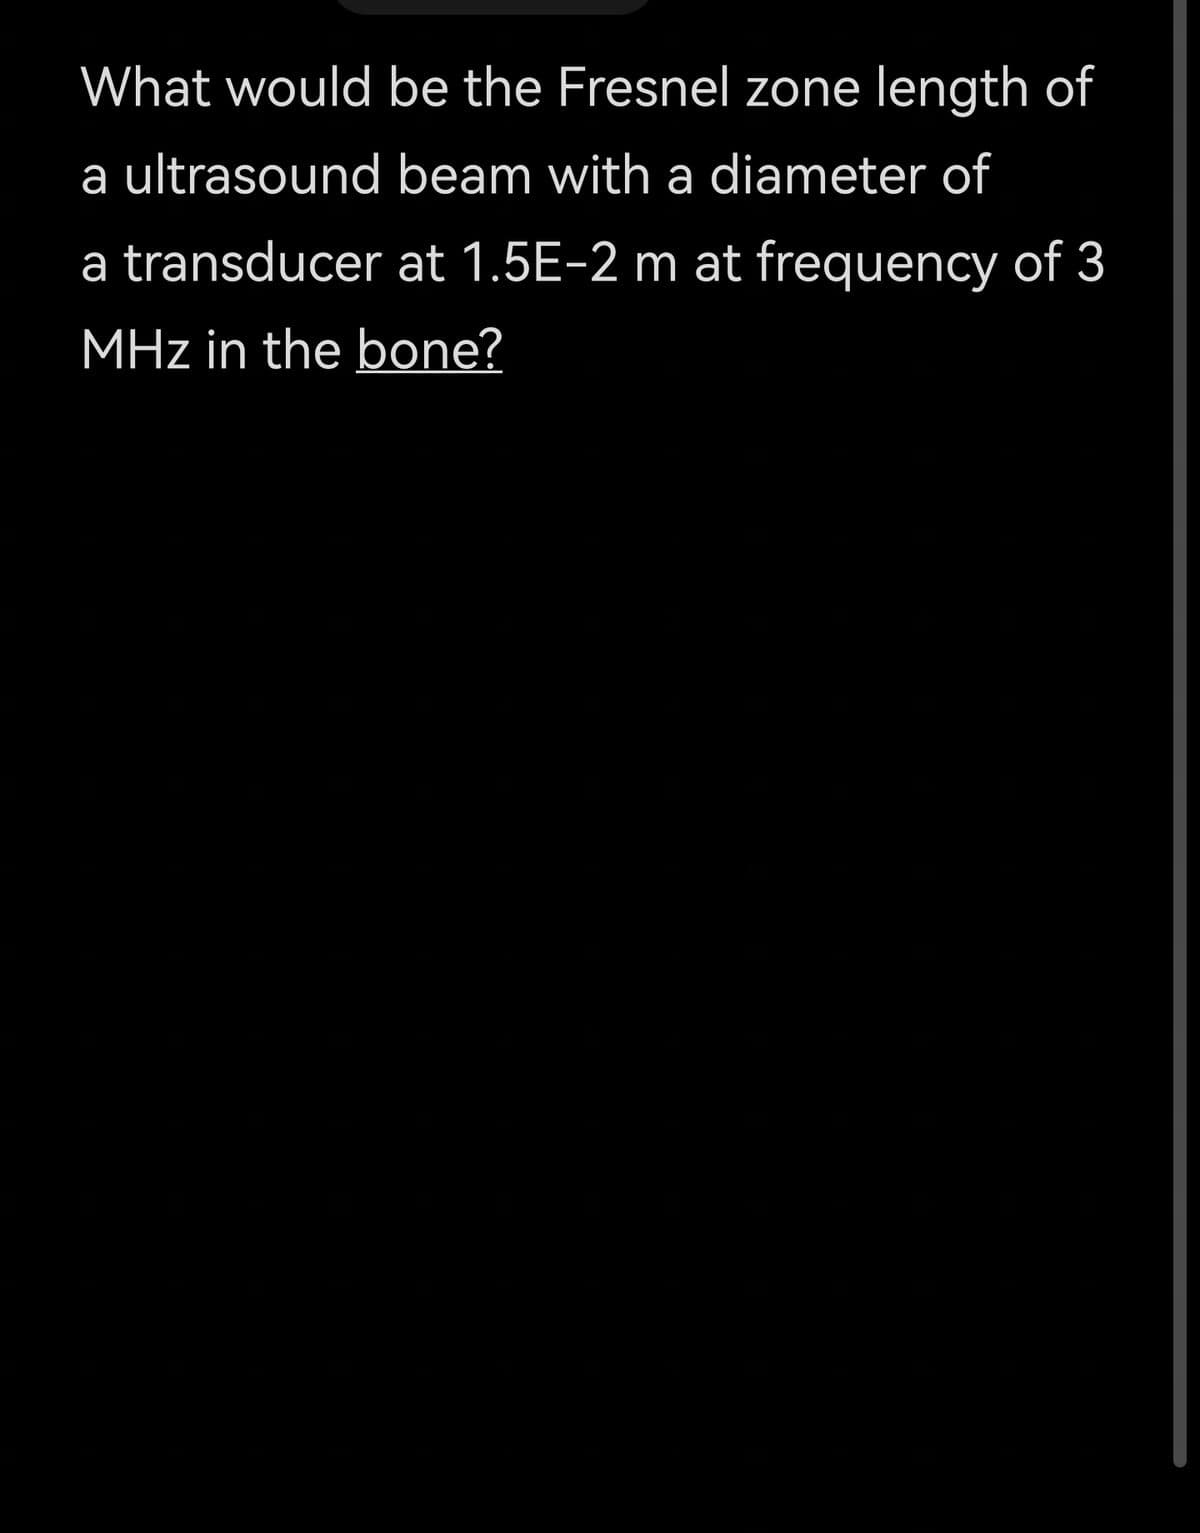 What would be the Fresnel zone length of
a ultrasound beam with a diameter of
a transducer at 1.5E-2 m at frequency of 3
MHz in the bone?